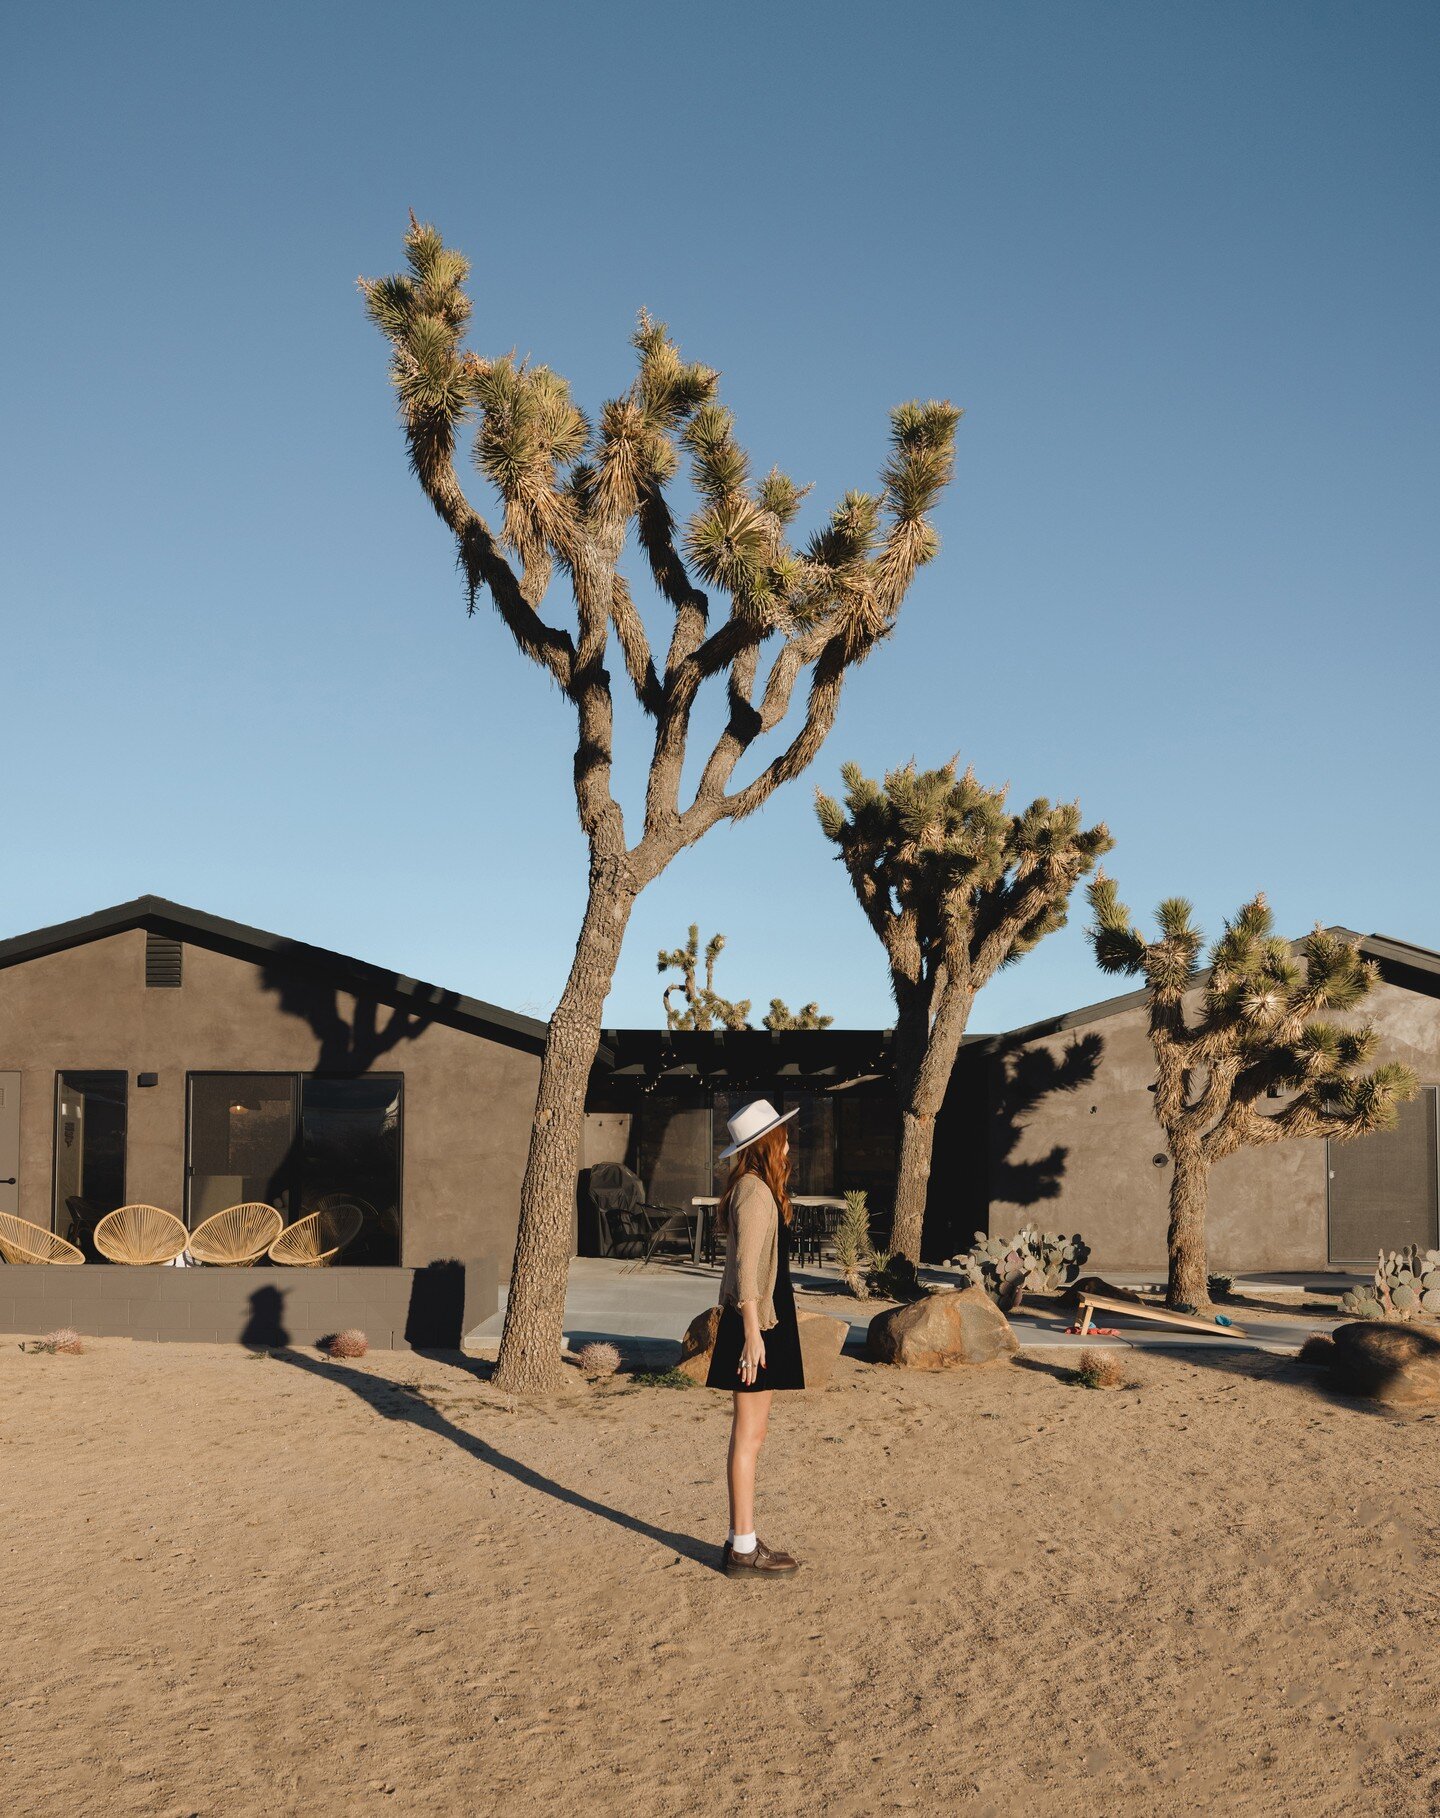 Welcome to The Cohost Collective @mulberryandpine. ✨ 
.
.
🖤 to @courticamp out there doing her best Joshua Tree Impression. 🌵
⁣⁣⁣⁣⁣⁠⁣⁣⁠.⁠
.⁠
.⁠
.⁠
🛠️ @wolfgangpichlerdesign⁠
🏠️ @mulberryandpine ⁠
📸 @courticamp⁠
.⁠
.⁠
.⁠
.⁠
#mulberryandpine #josh